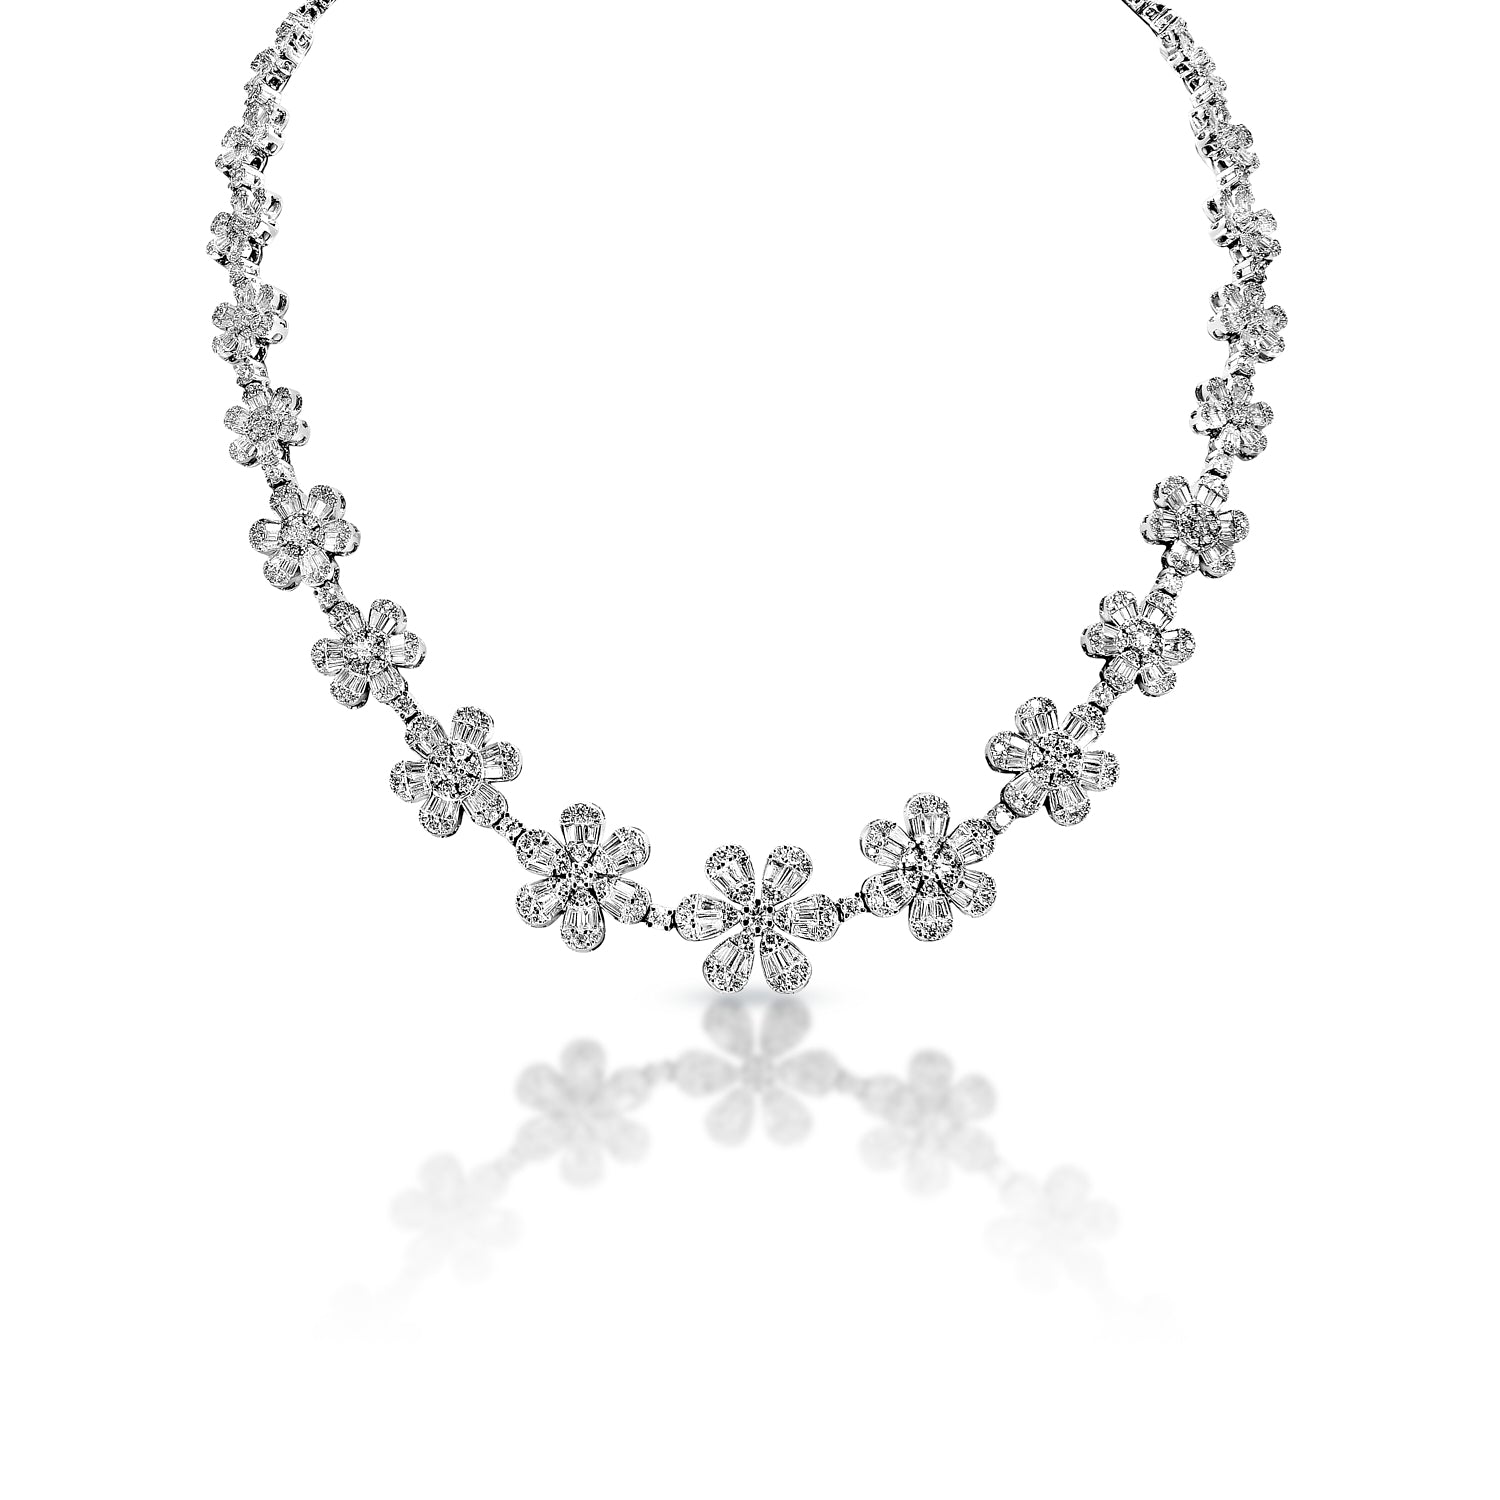 Jaylani 13 Carat Round Brilliant Diamond Necklace in 14k White Gold Front View